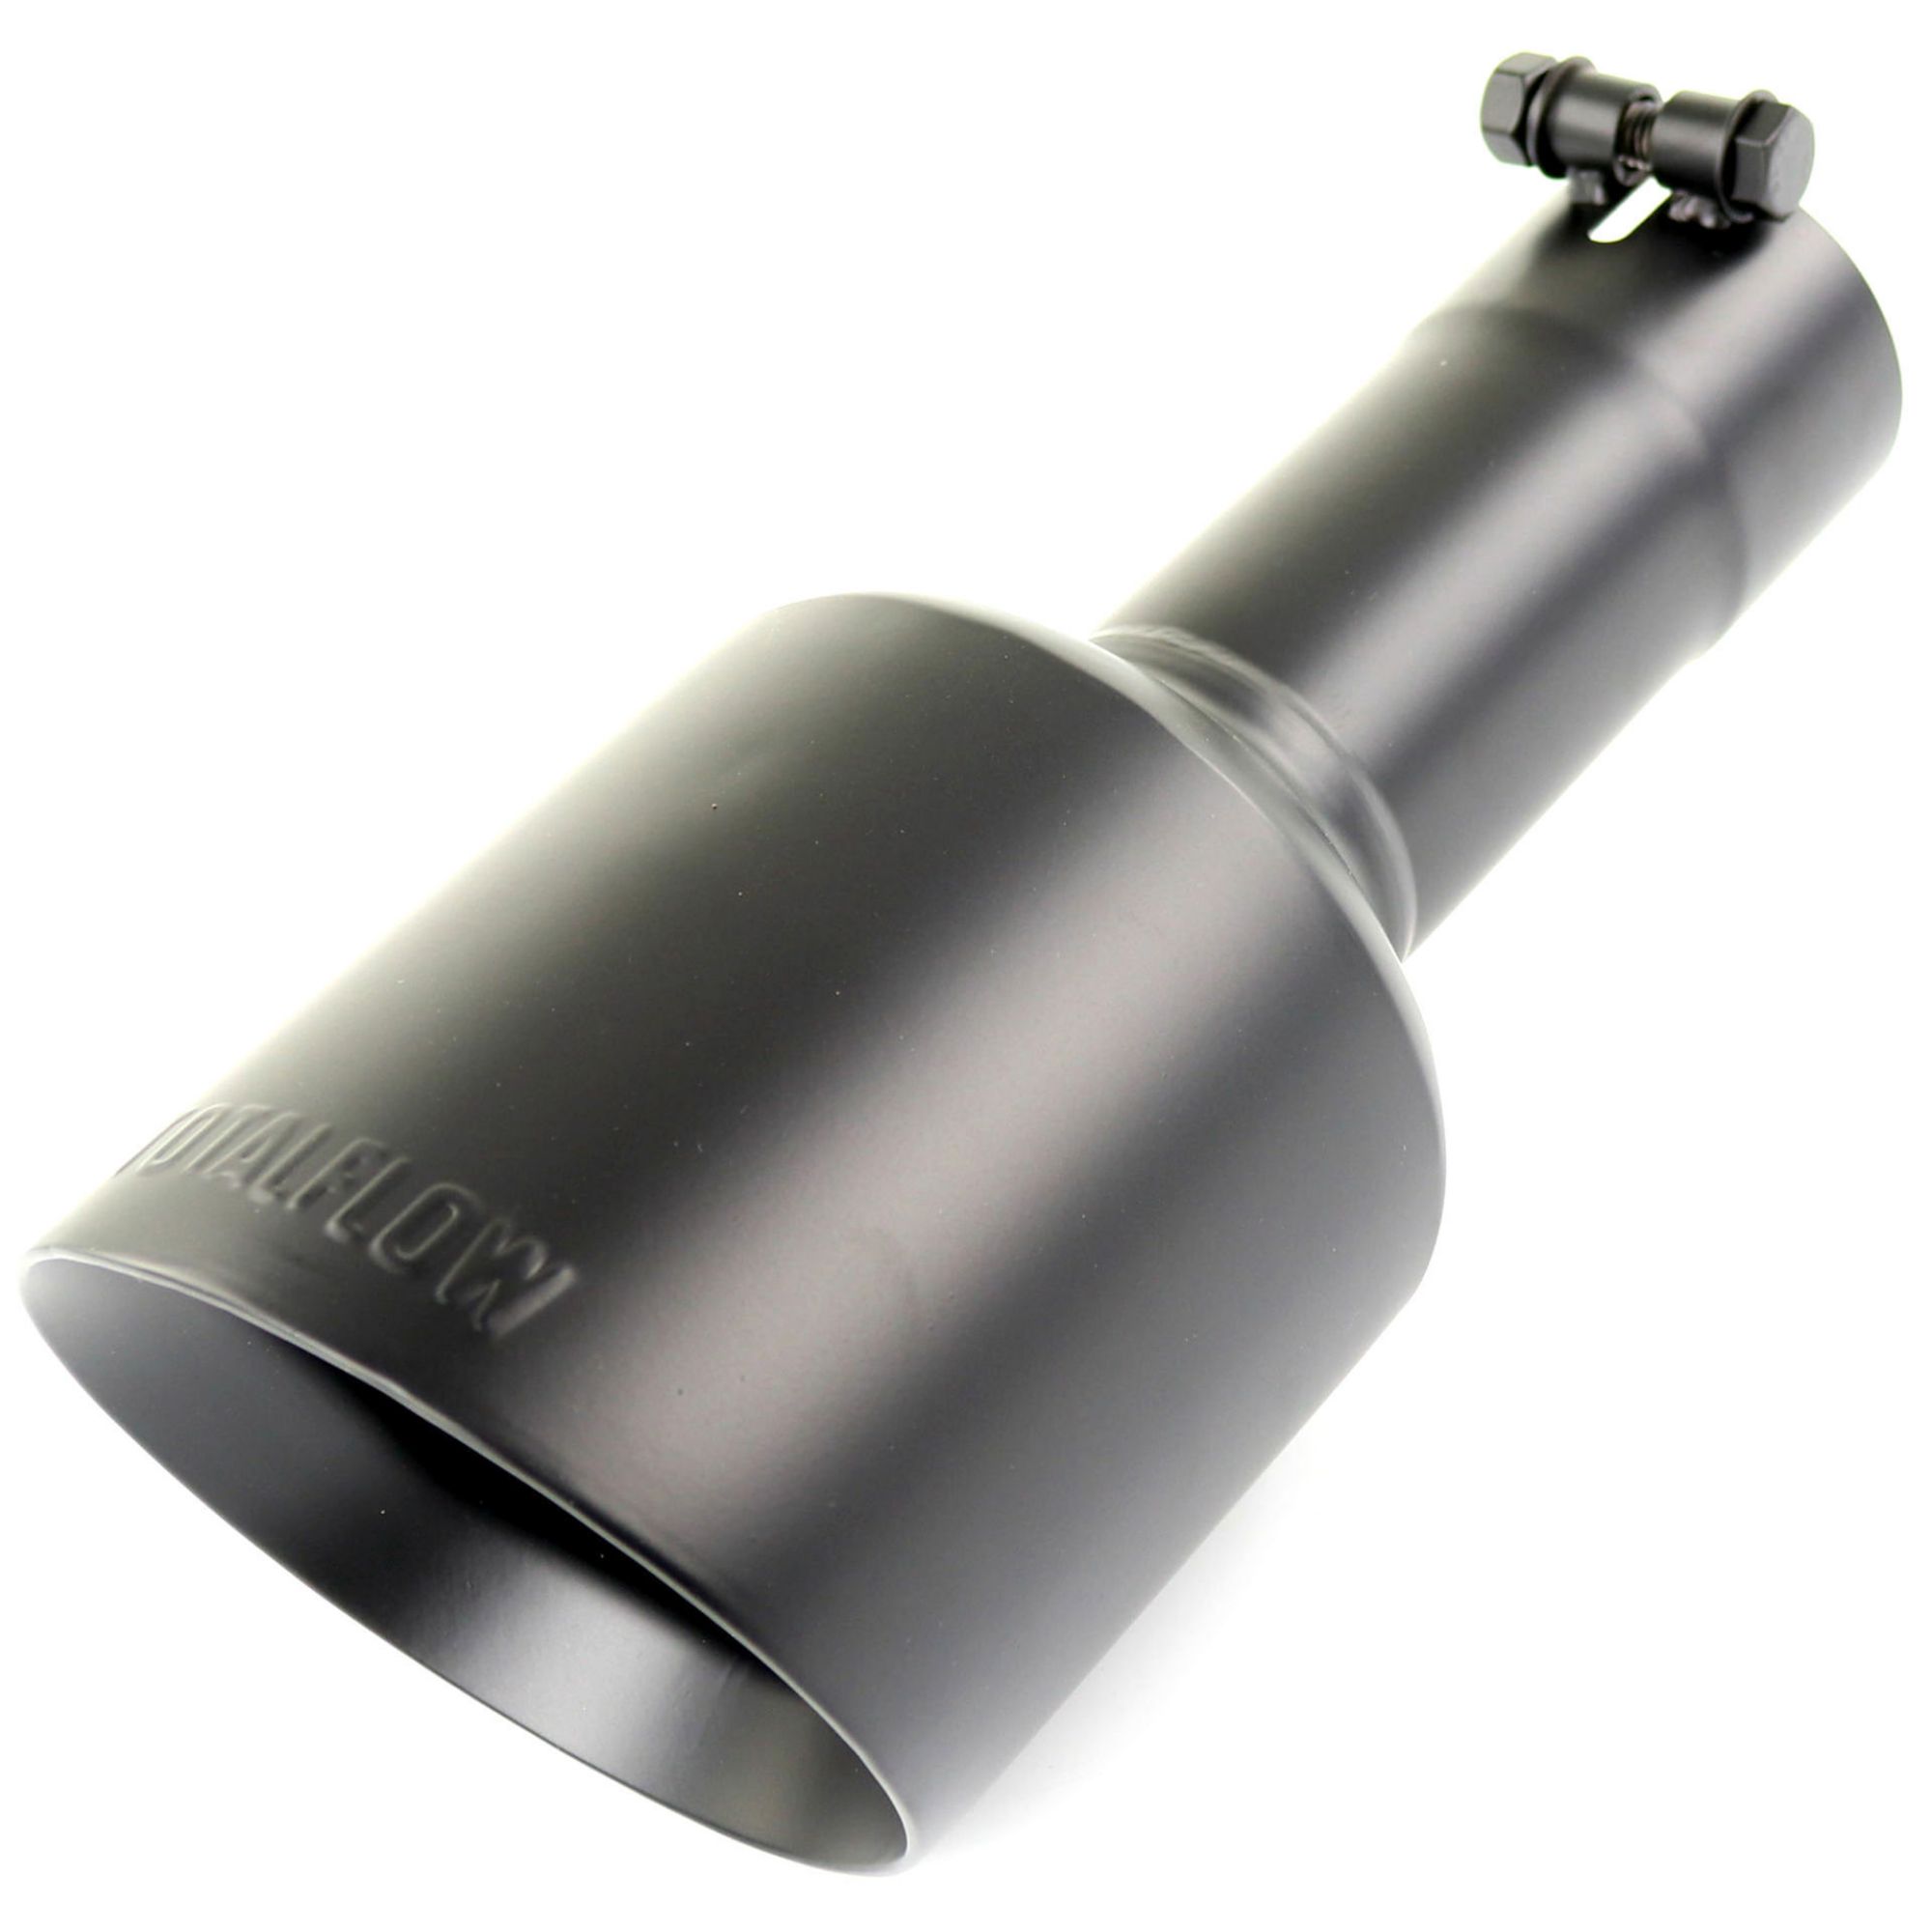 TOTALFLOW 5122B Universal Bolt-On Double Wall 2" Inch Exhaust Tip - Black Finish